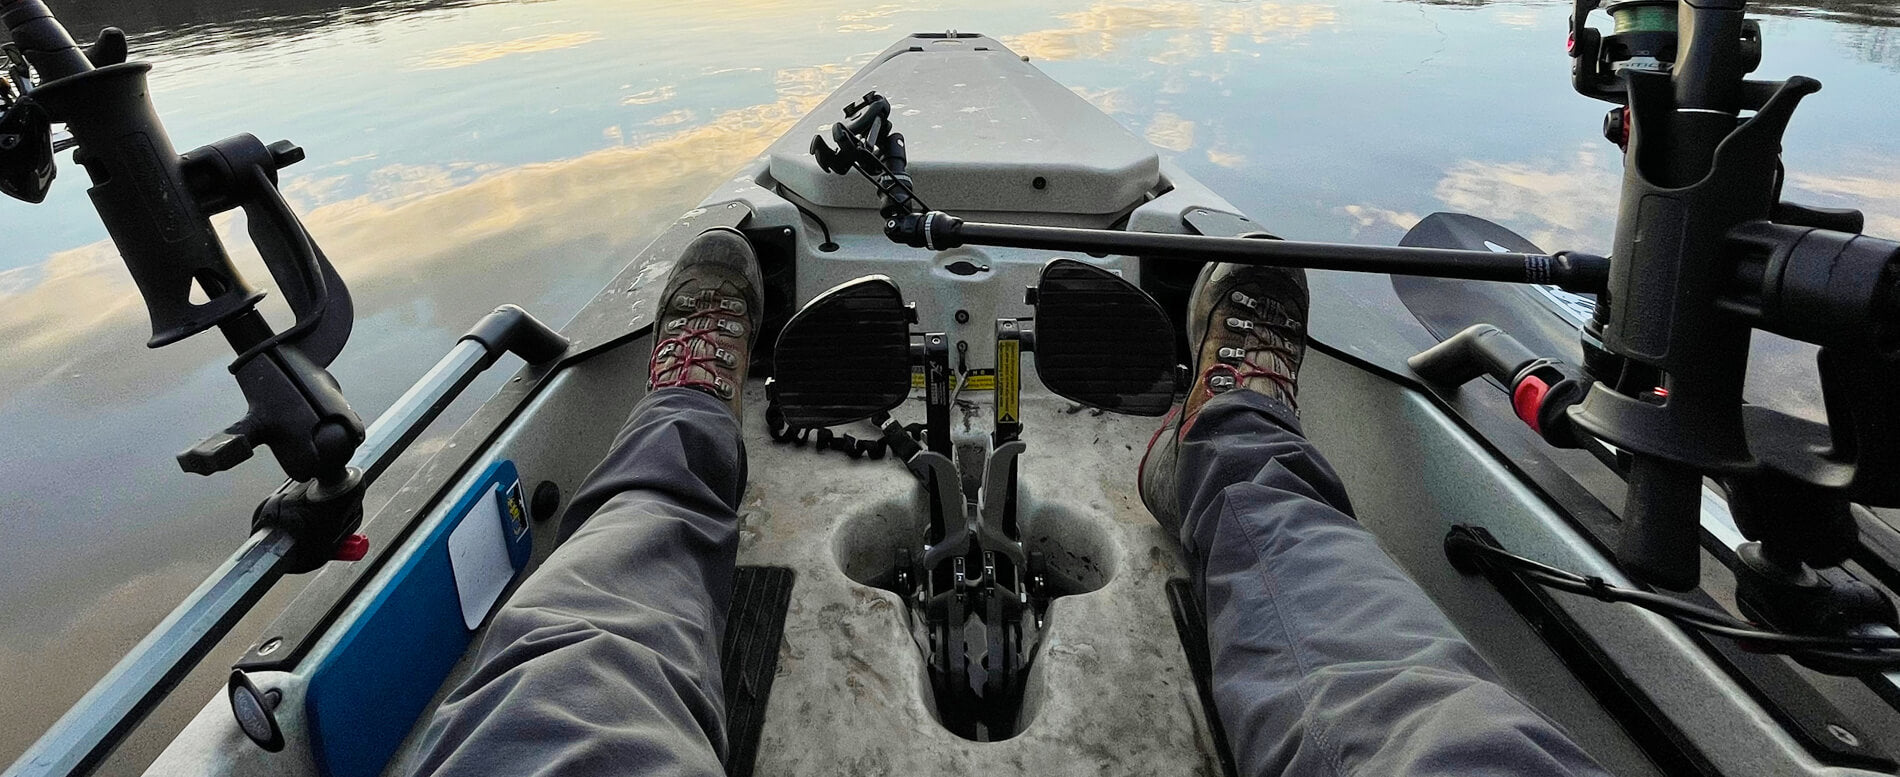 Pedal kayak with a fishing rod